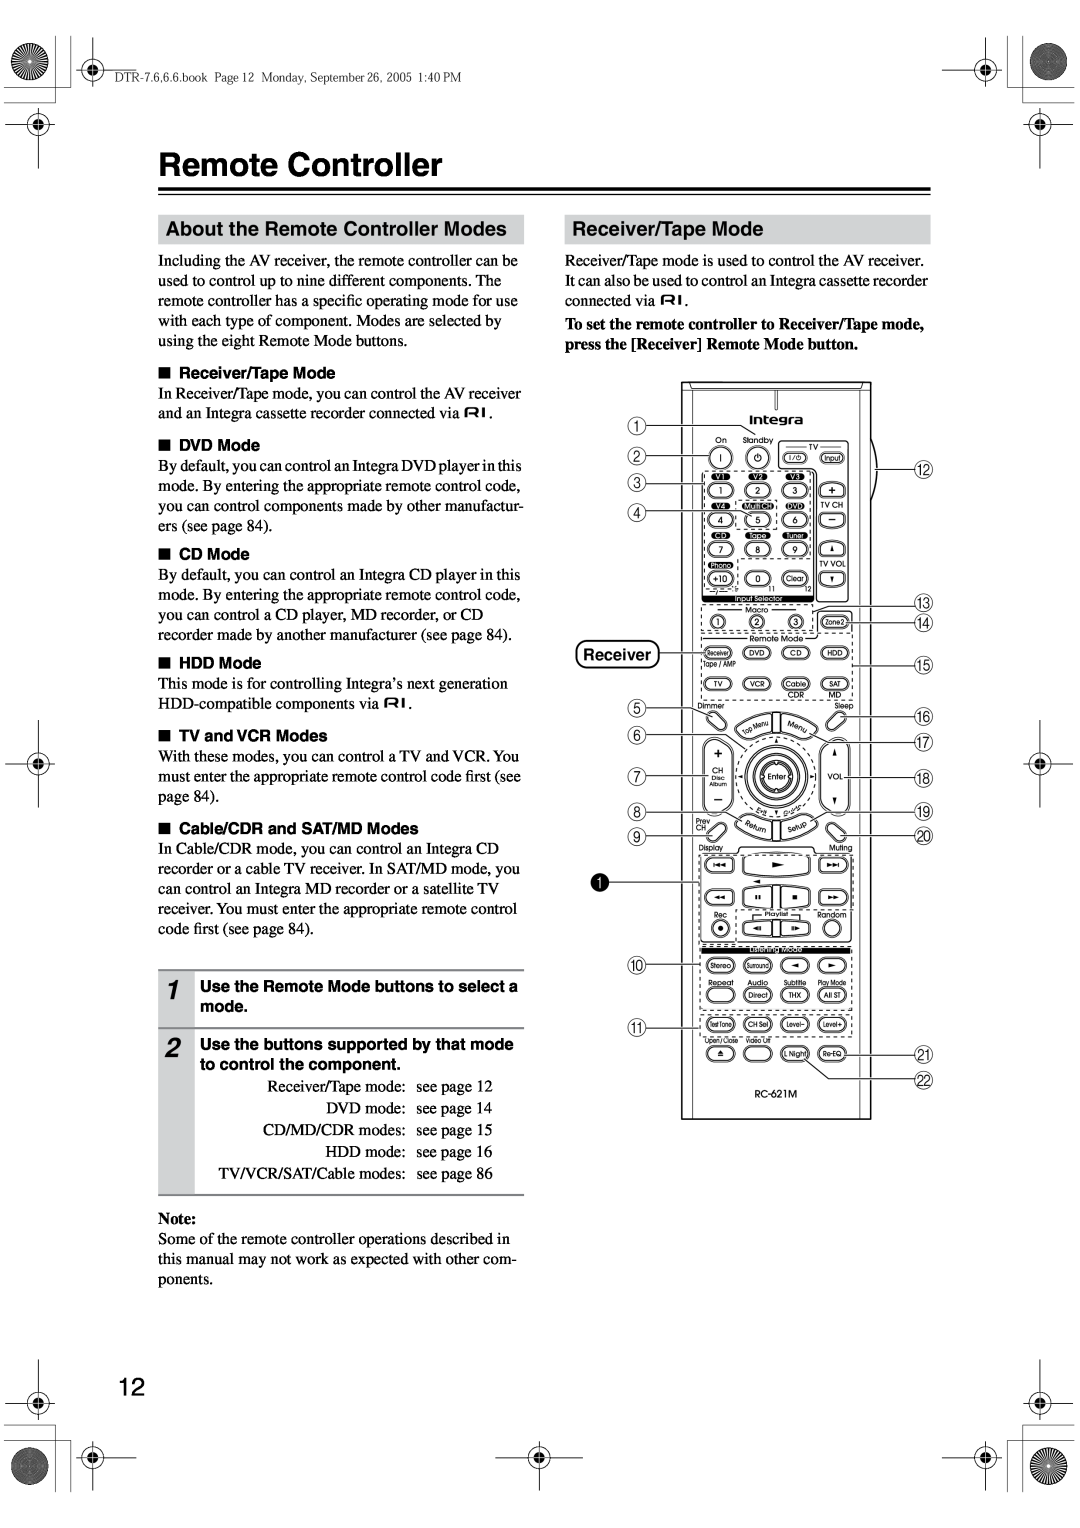 Integra DTR-7.6/6.6 instruction manual About the Remote Controller Modes, Receiver/Tape Mode 